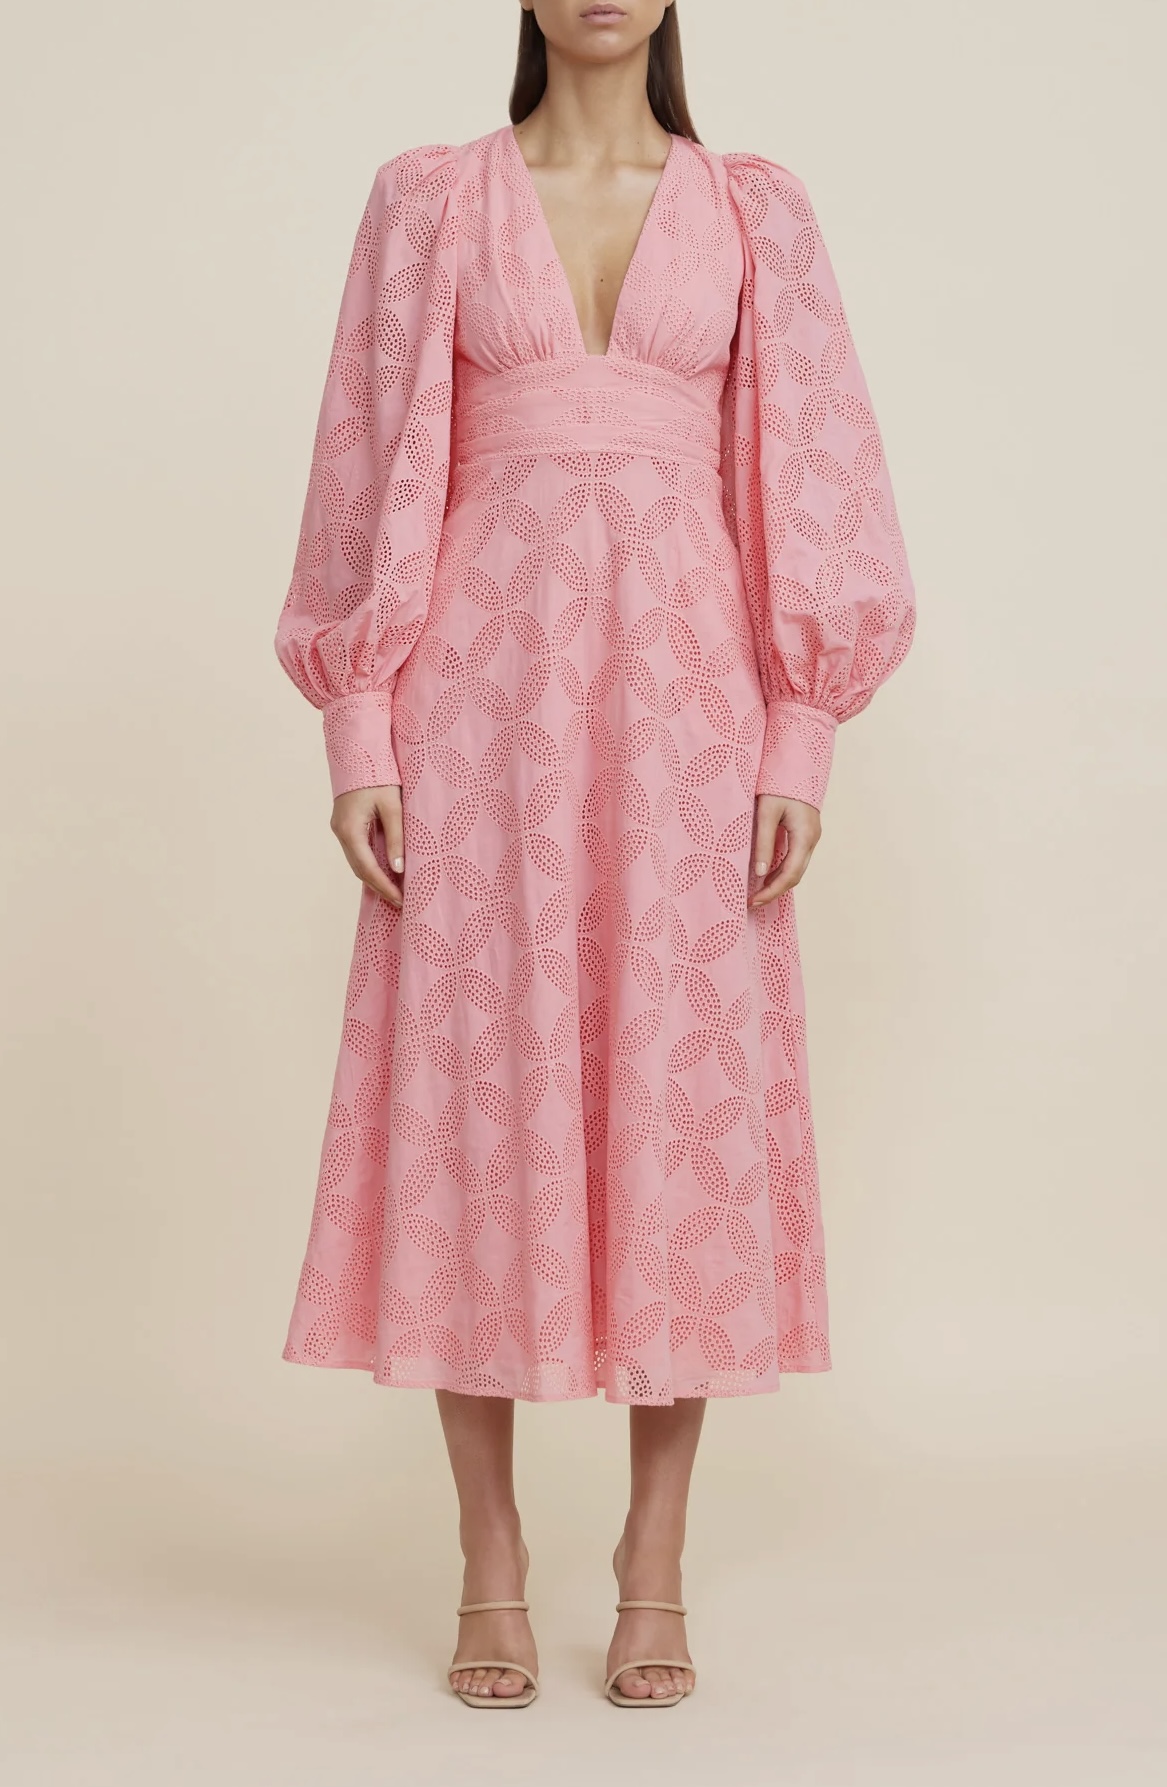 Acler Lowell Dress. Pink maxi dress with balloon sleeves and v neckline.